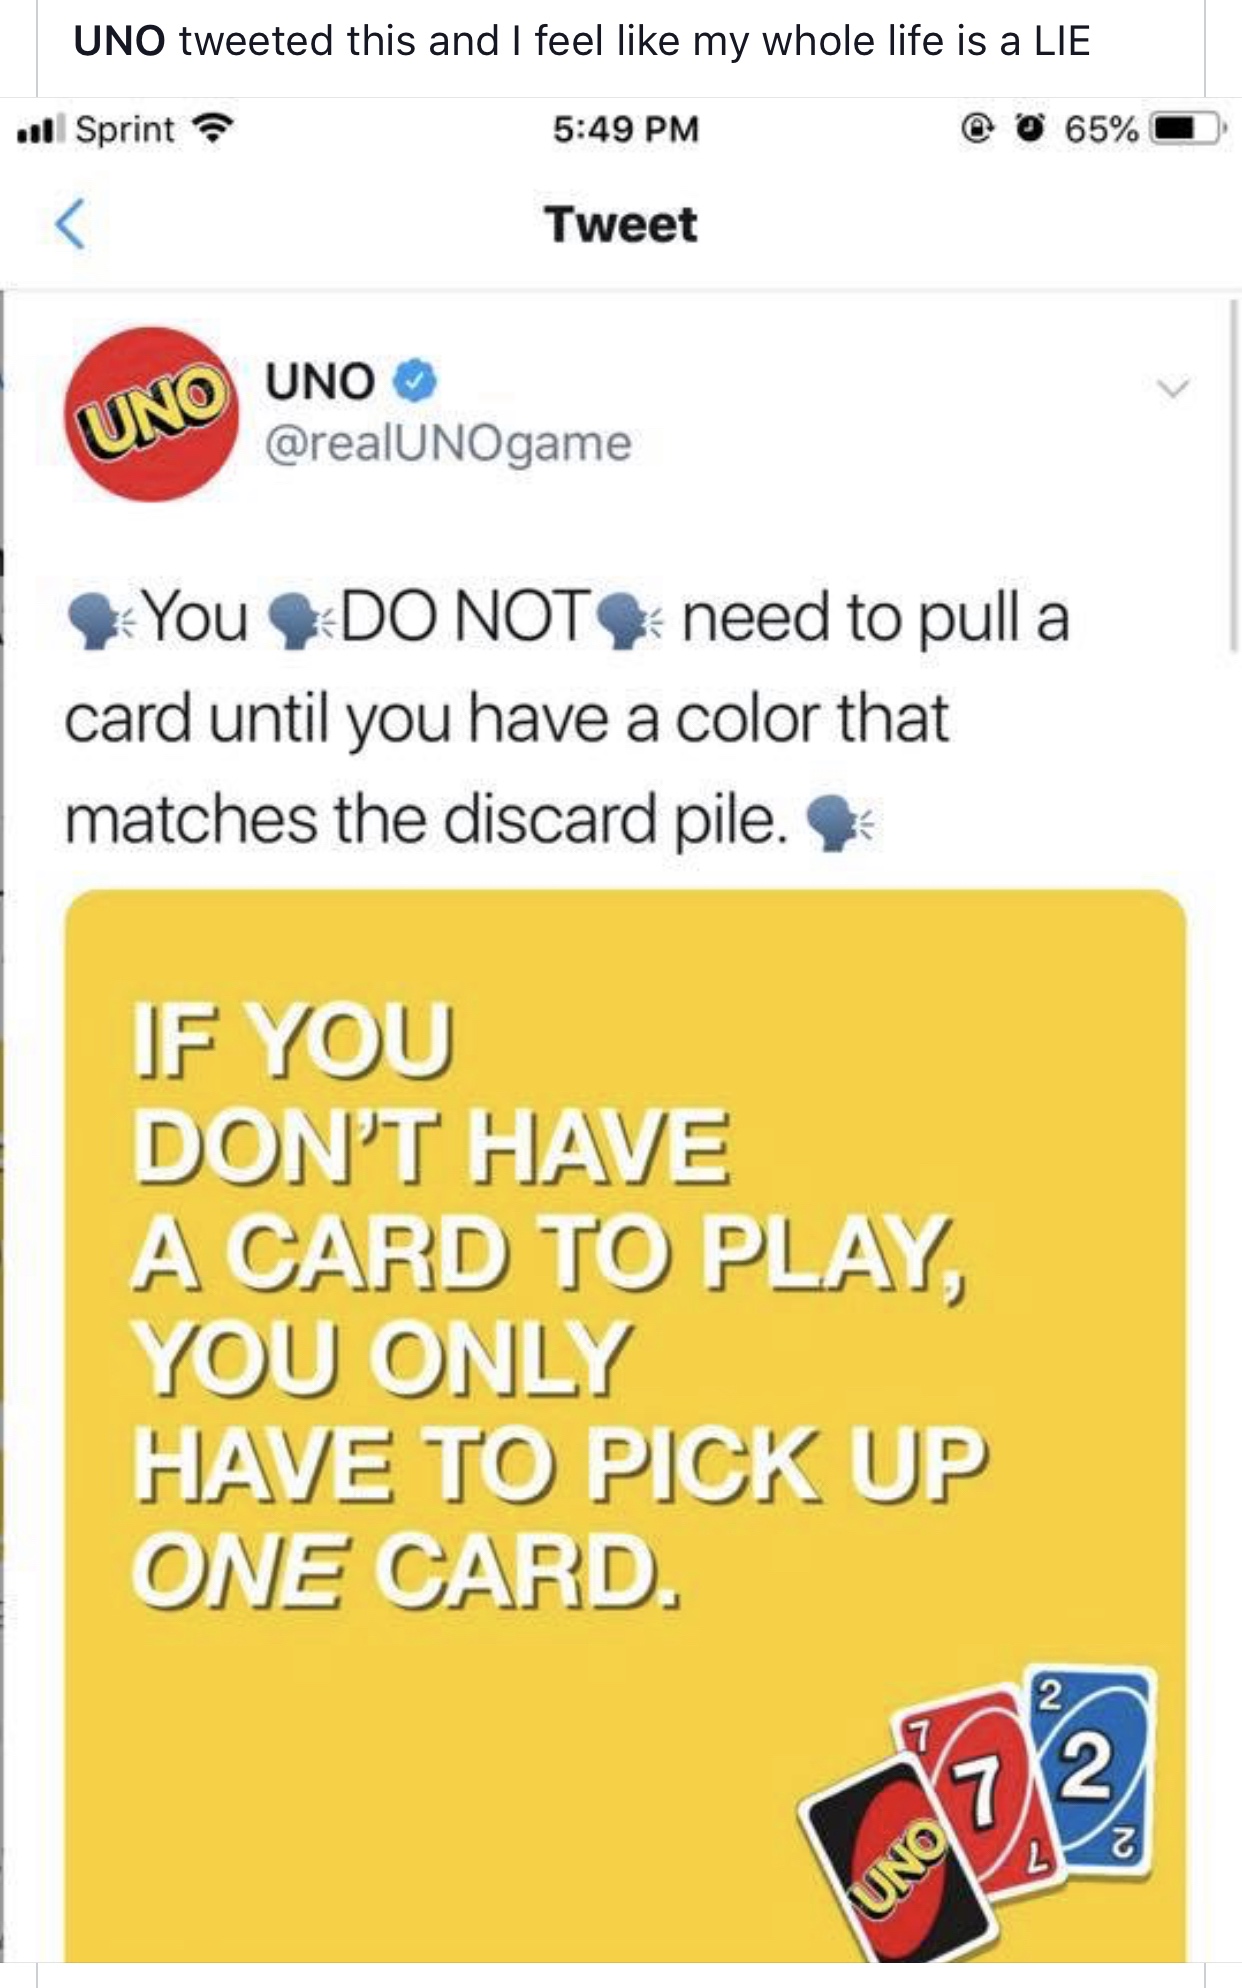 world is carmen sandiego - Uno tweeted this and I feel my whole life is a Lie ull Sprint 0 65% Tweet Uno Uno game You Do Not need to pull a card until you have a color that matches the discard pile. If You Don'T Have A Card To Play You Only Have To Pick U